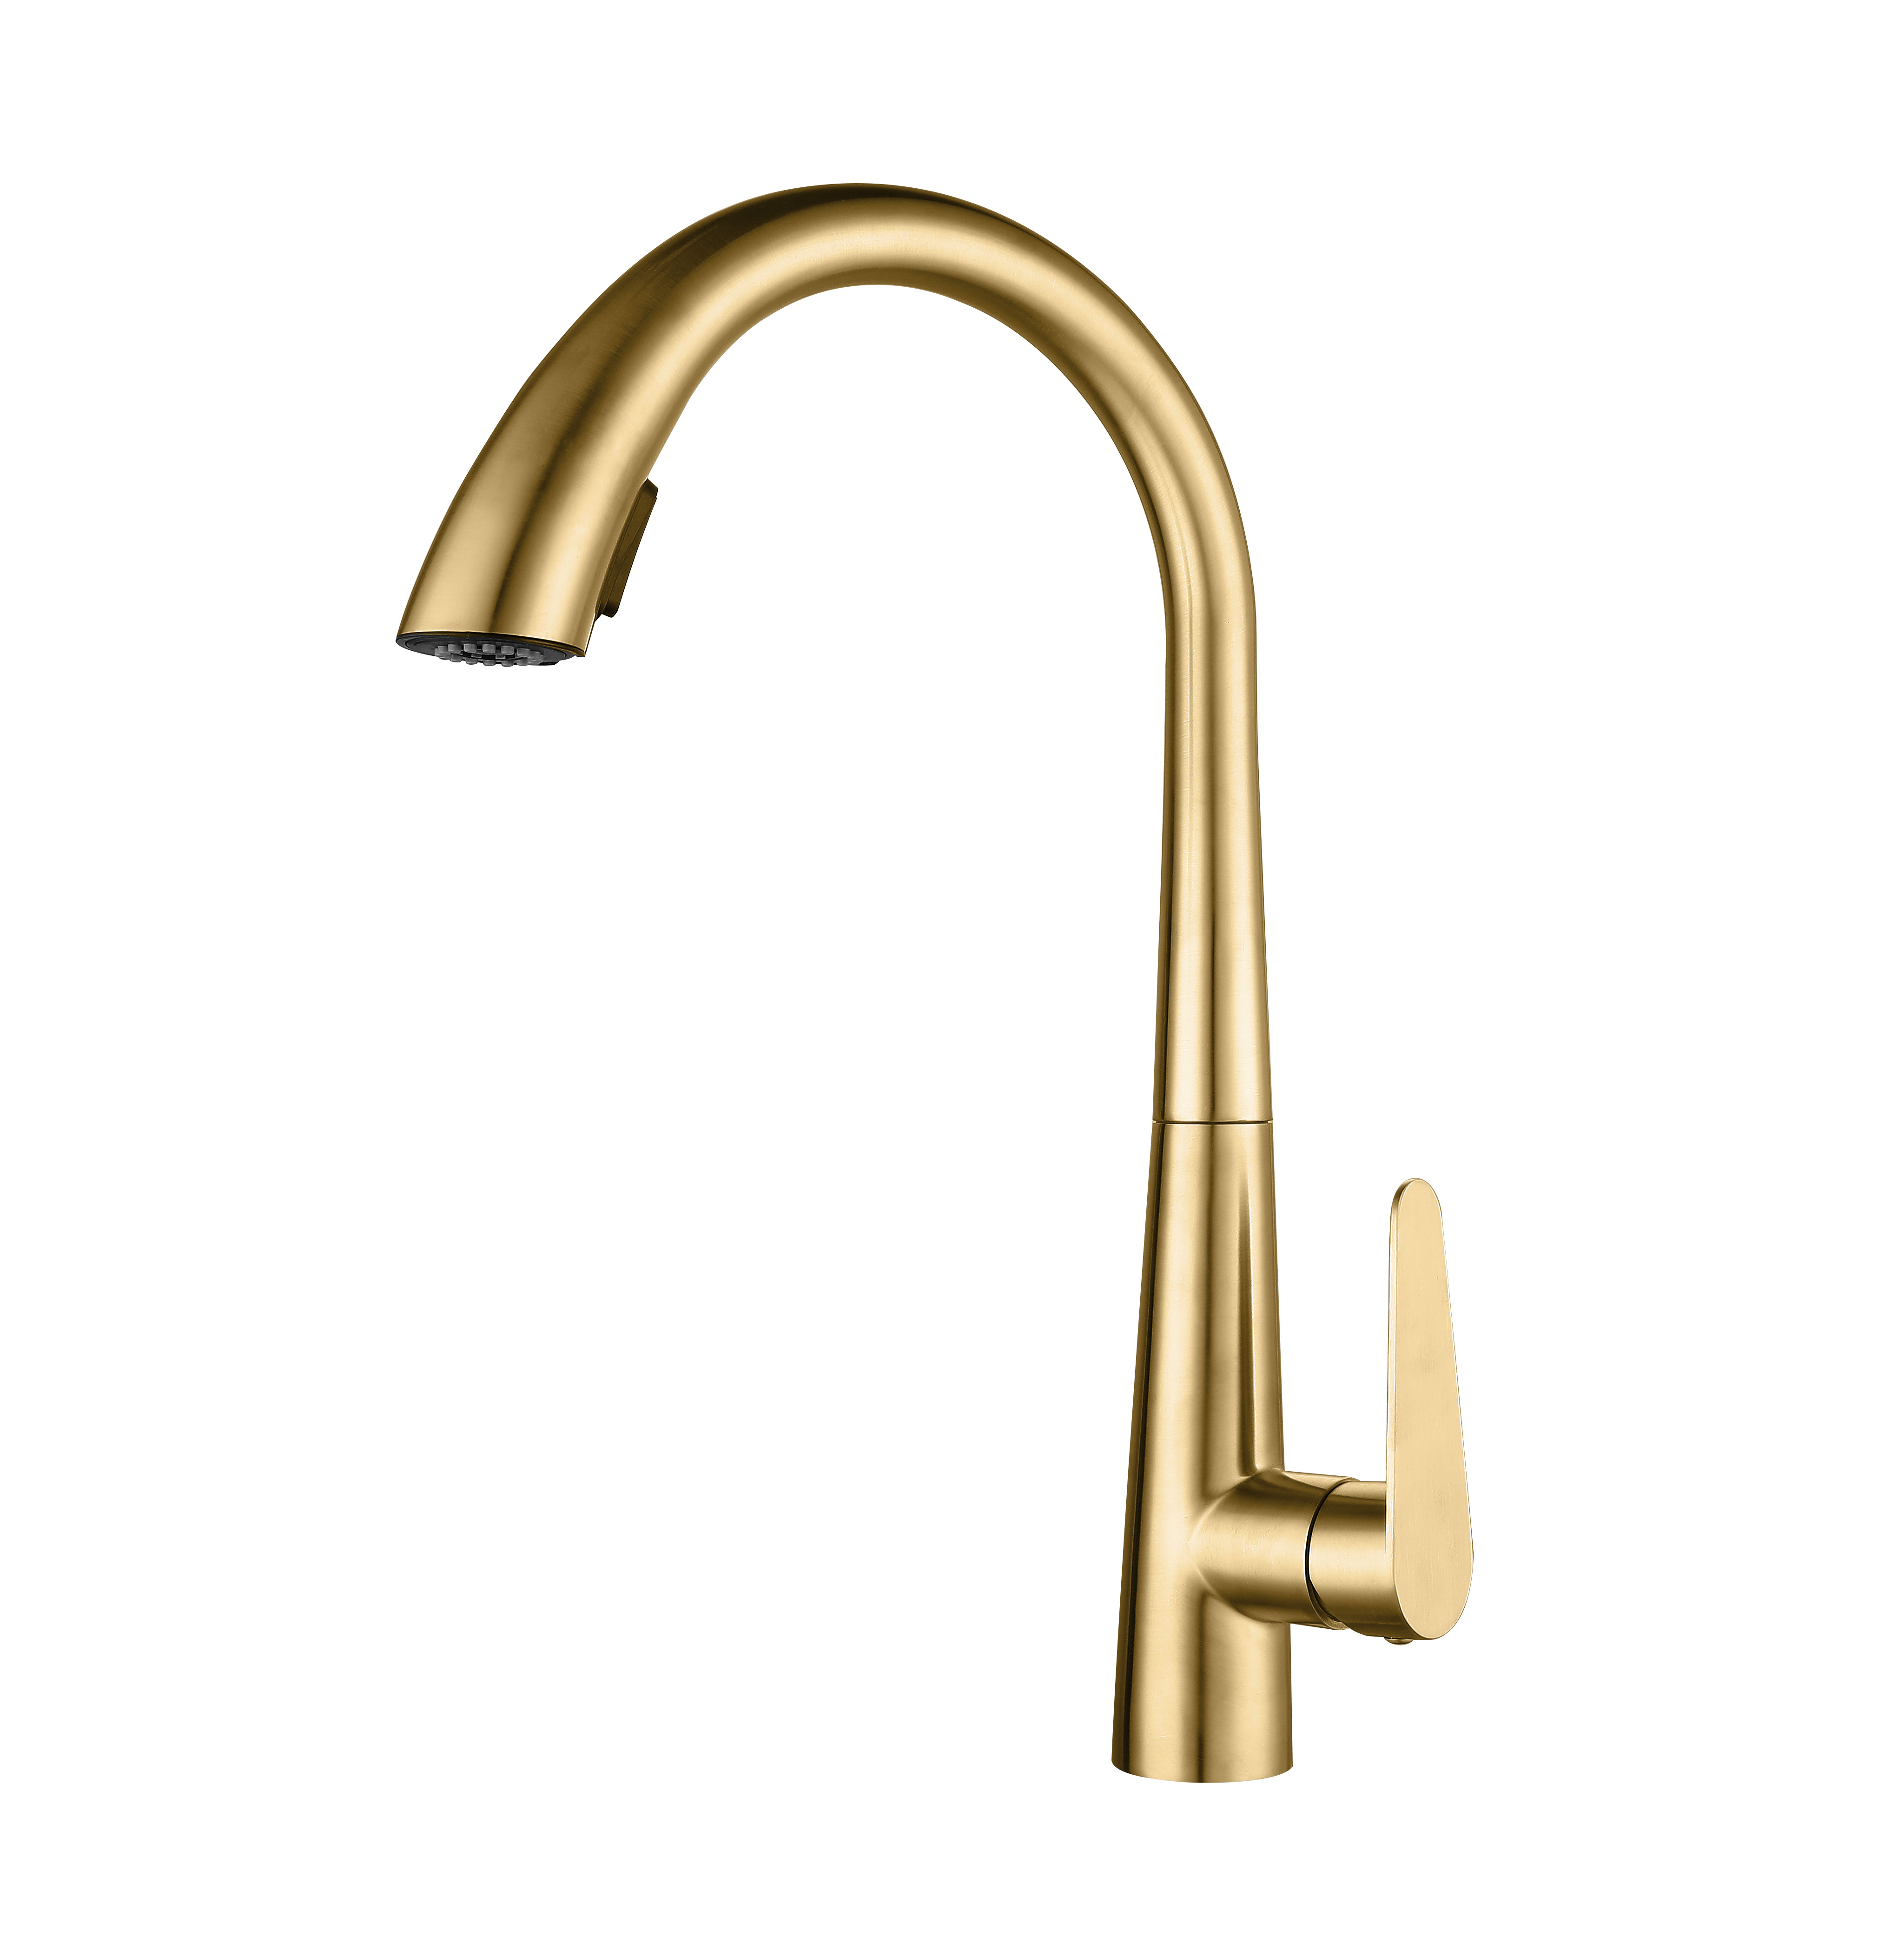 Gold faucet stainless steel Kitchen Faucet Flexible Pull down  Faucet with Sprayer Dexing faucet OEM/ODM